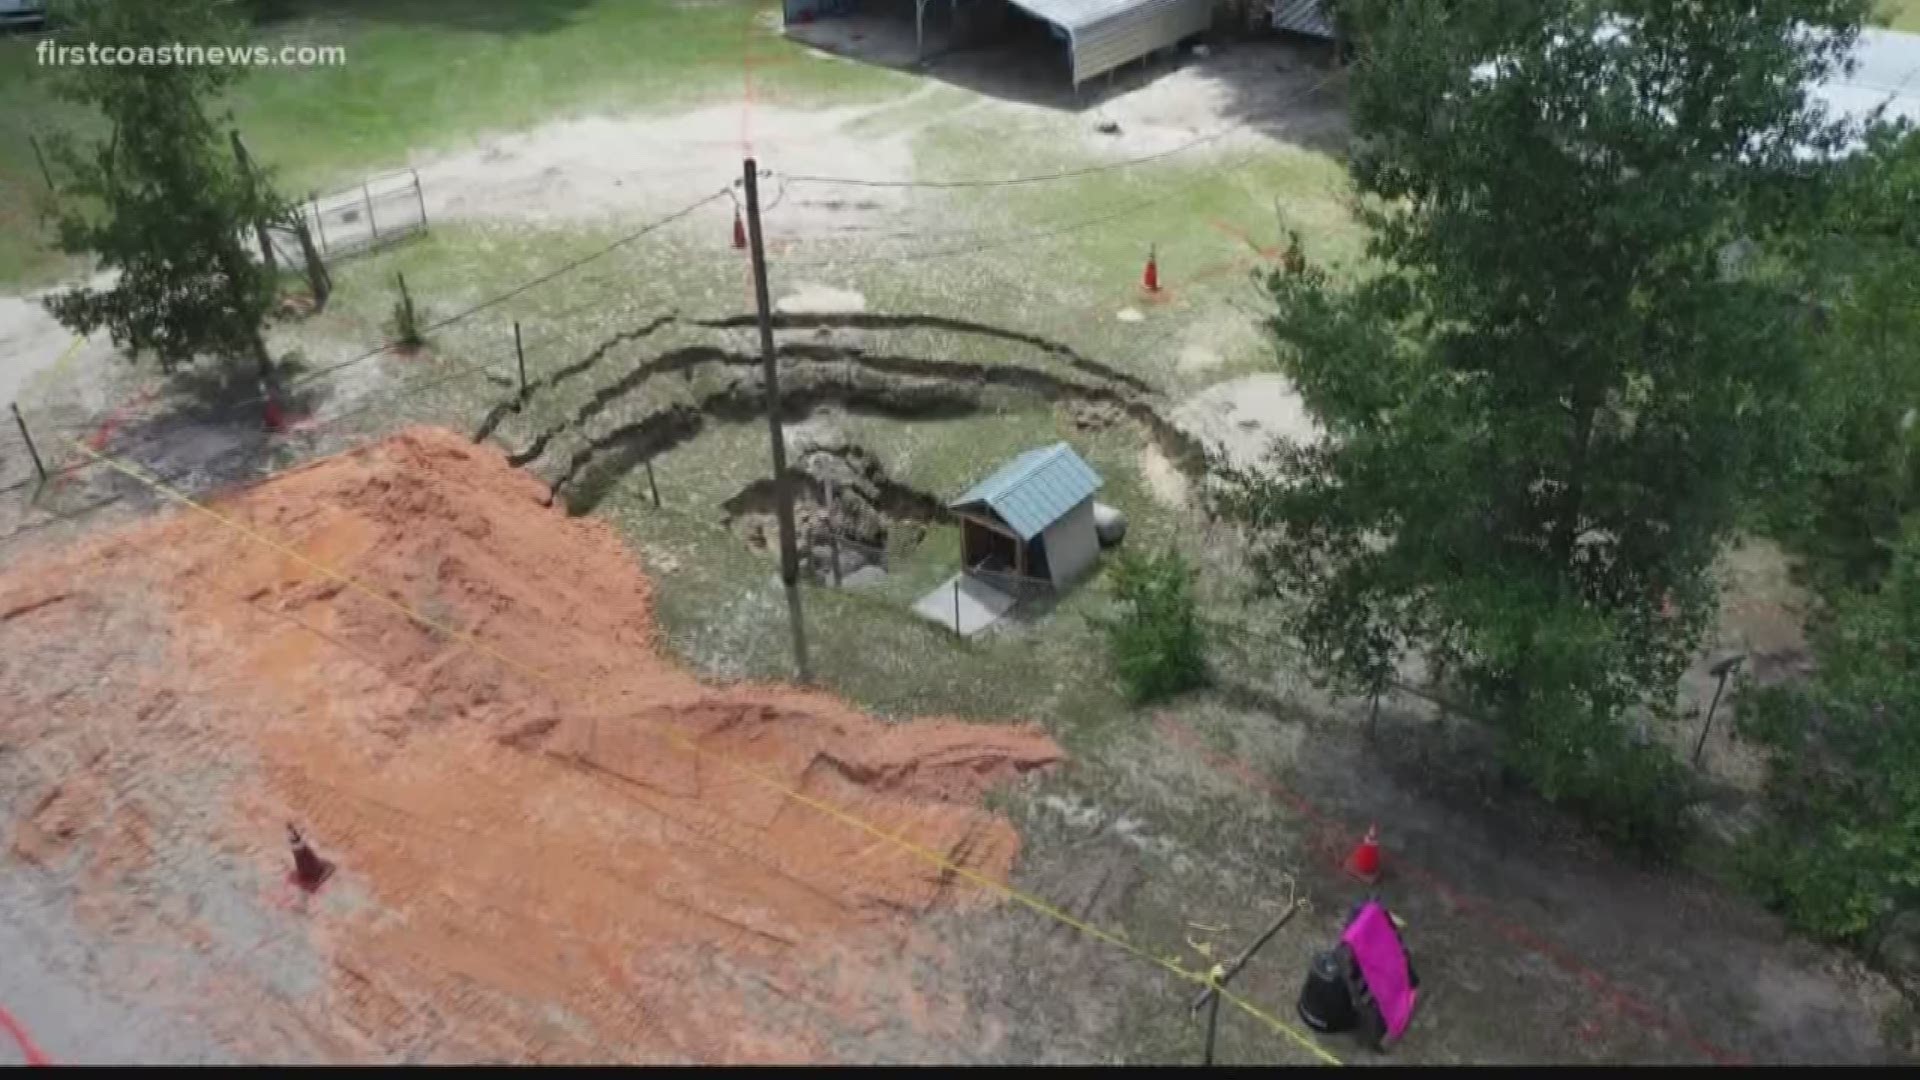 "Our neighbors lived there for 20 plus years and they didn't think they were living on a sinkhole."